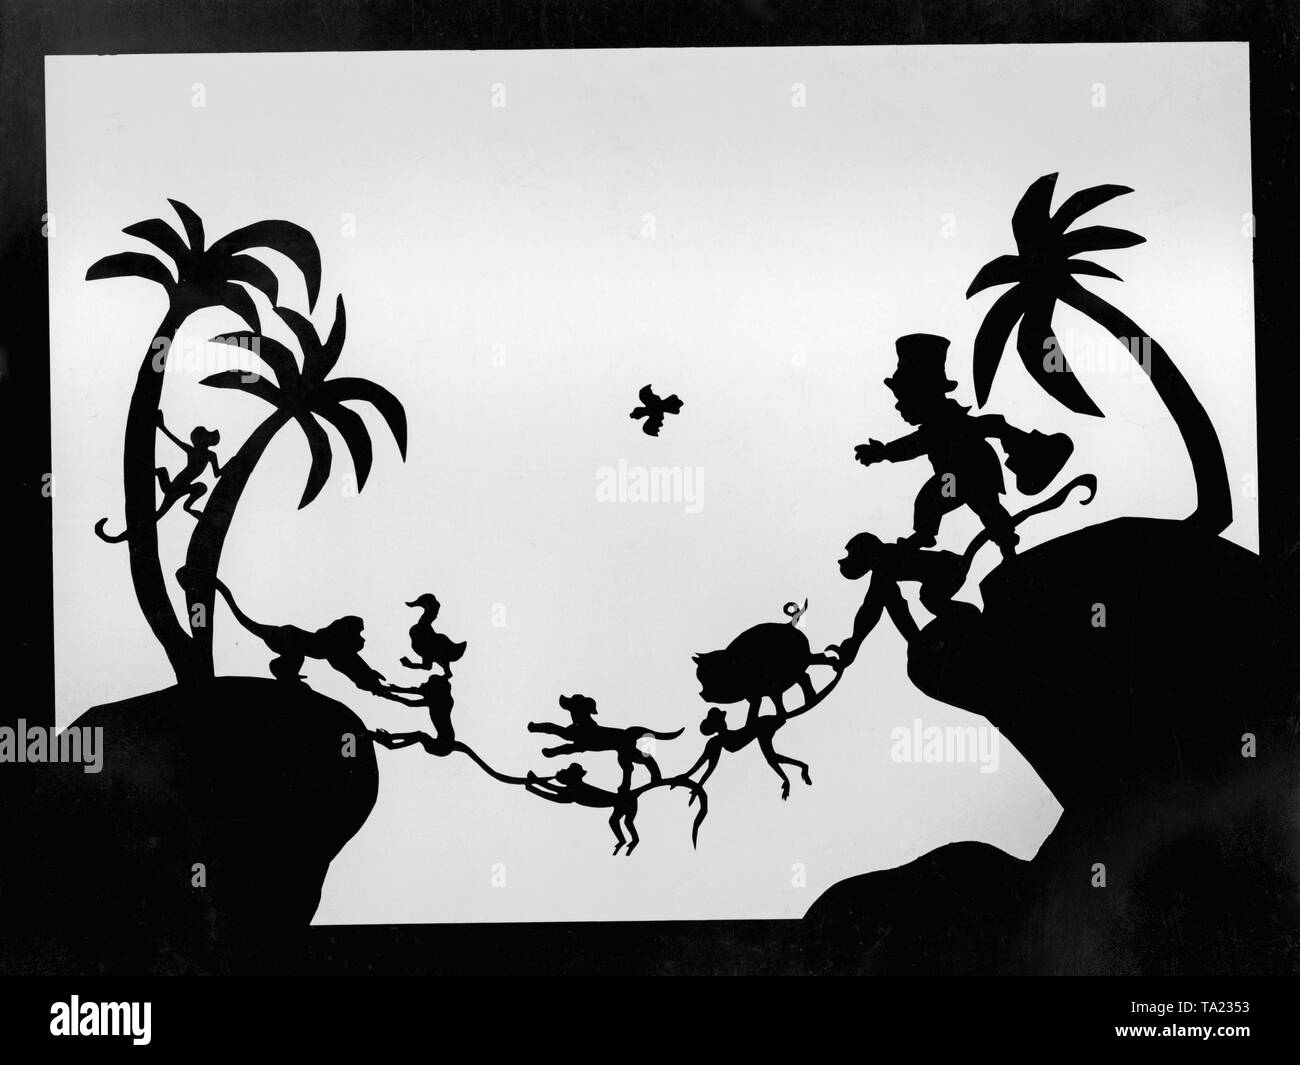 This photo shows a scene from the silhouette film 'Dr. Dolittle and His Animals' - subtitle: 'The Bridge of Apes' by Charlotte Reiniger. The silhouette film, also known as silhouette animation, is a technique of animated film in which silhouettes are put together on a lighted glass plate in front of a white or black background to form a film. The result is the silhouette film, inspired by shadow theater and the pictorial techniques of silhouette cutting. Stock Photo